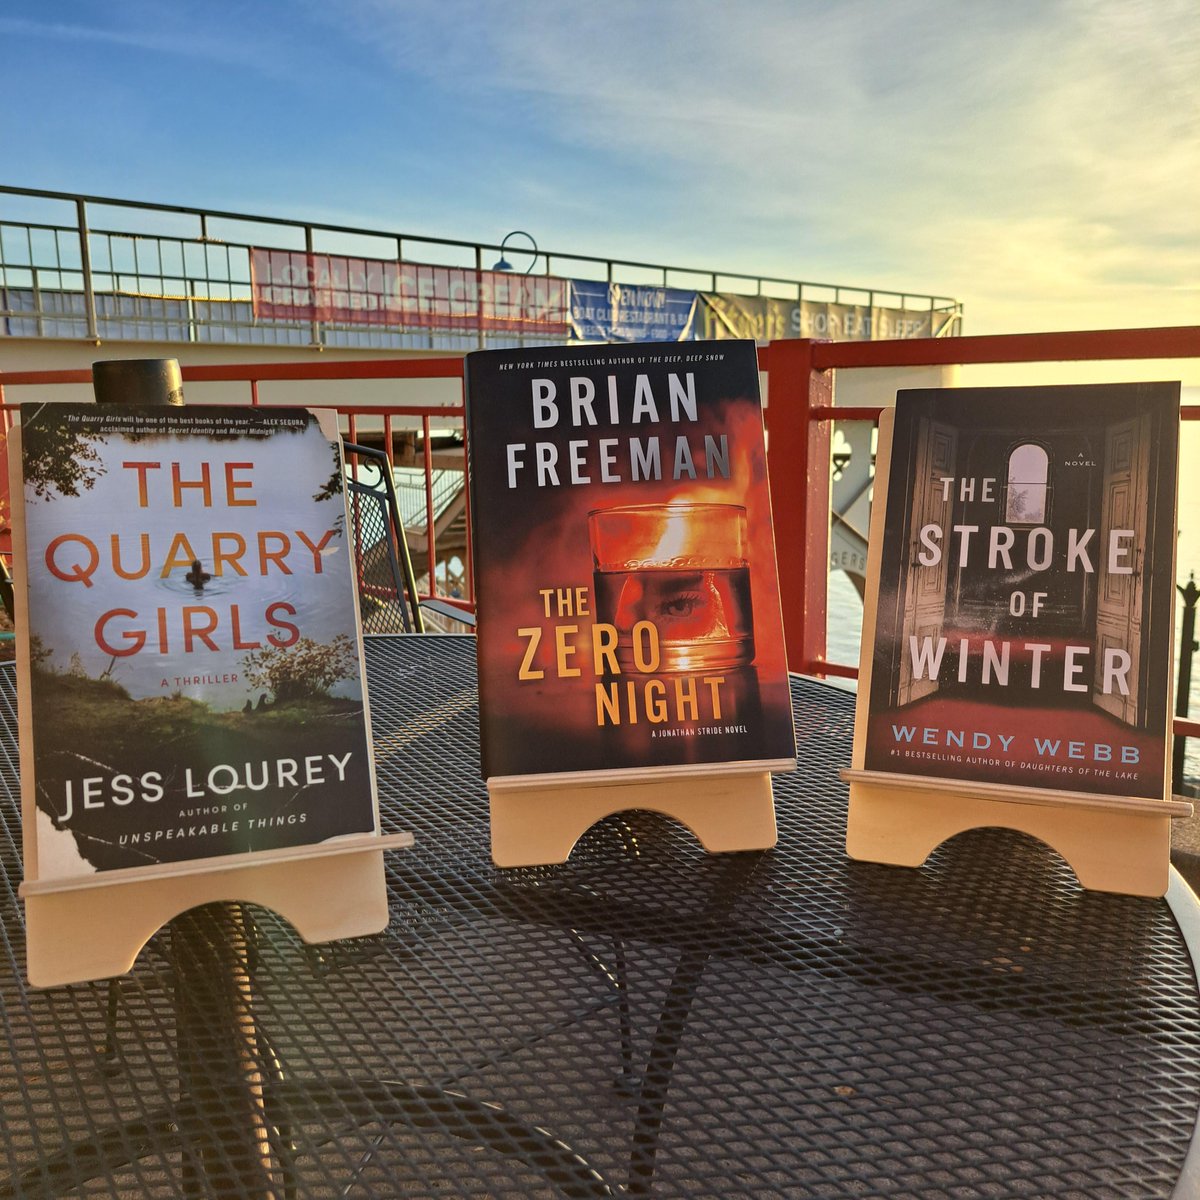 And last, but not least for our Features (we could feature everything, but we'll still be typing posts NEXT Tuesday) are the new books from three of our favorite #localauthors. @jesslourey @bfreemanbooks @wendywebbauthor all have new books out today! We can't wait! #indiesfirst